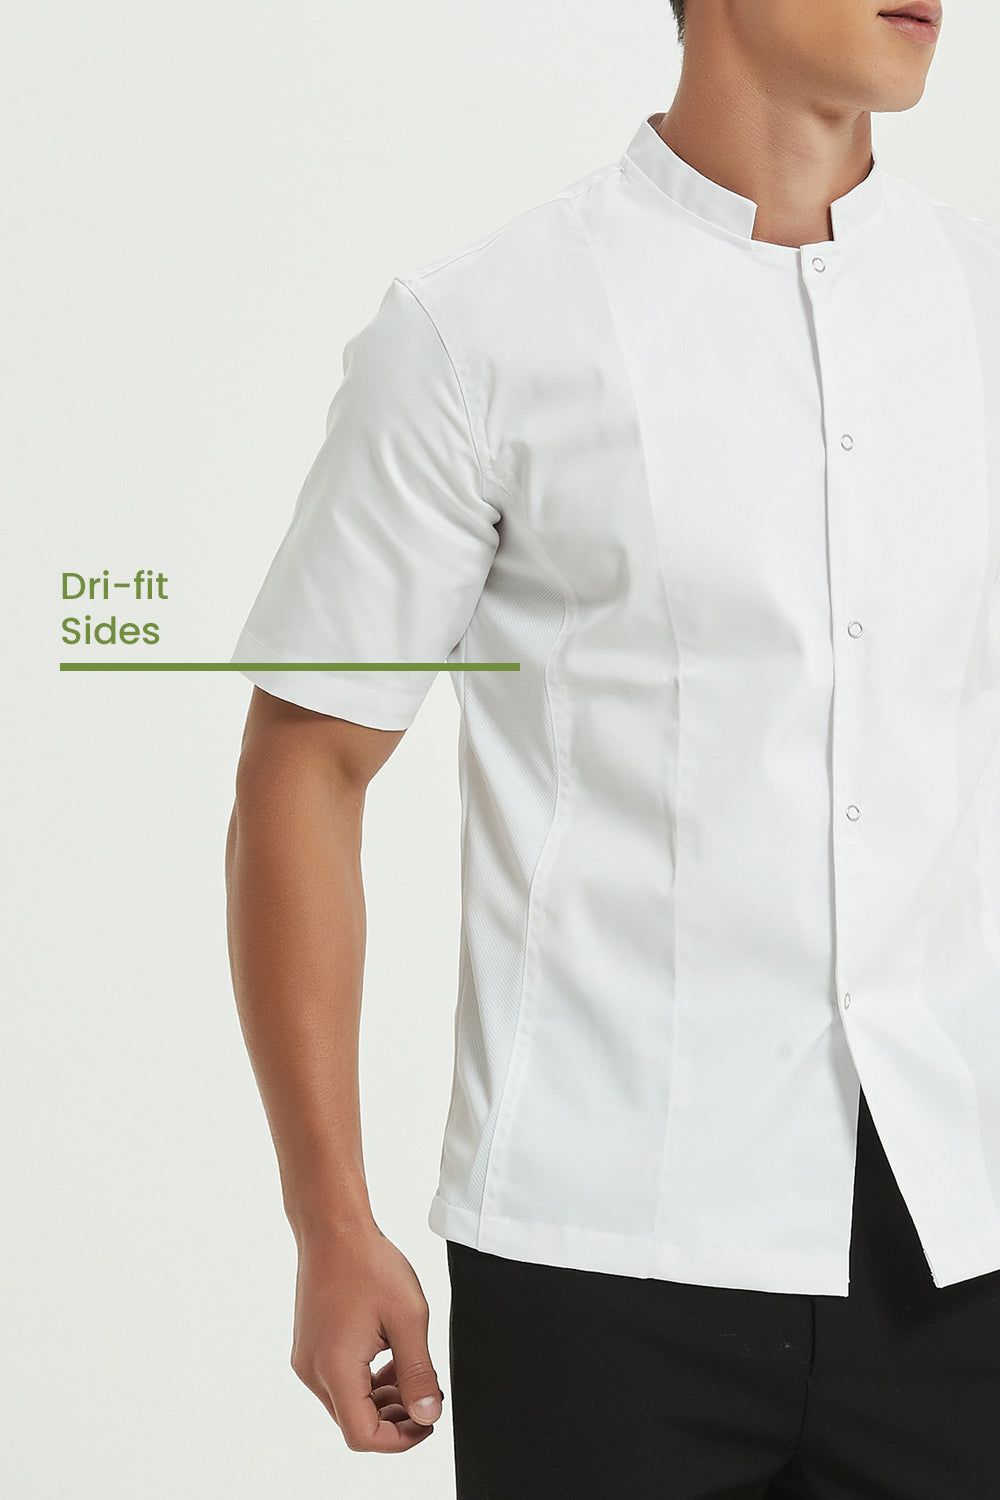 Mint Chef Jacket Short Sleeve with Dri-fit, Side View